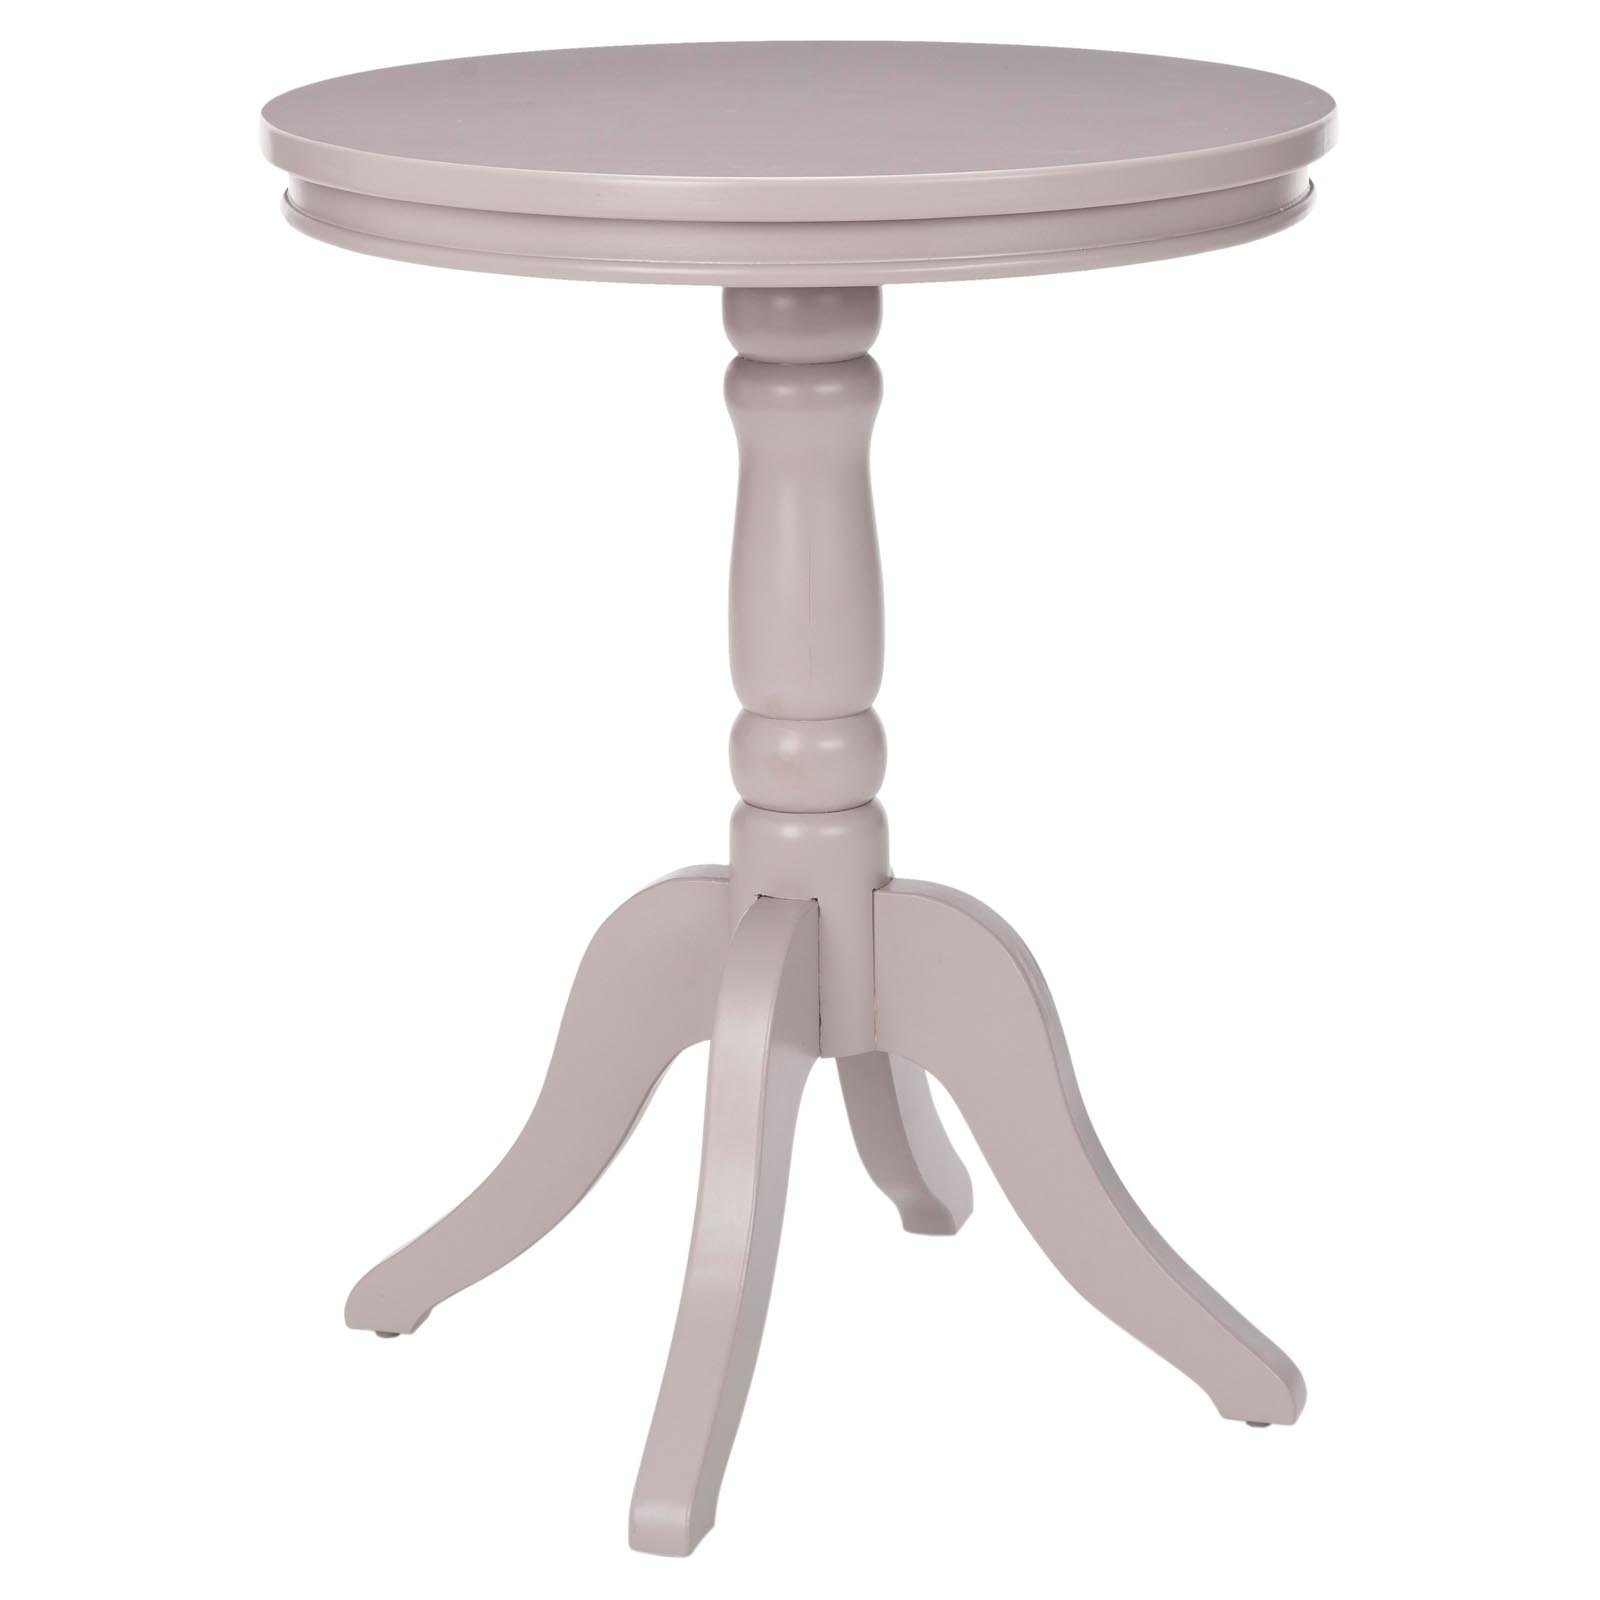 Safavieh Juliet Pine Wood Side Table in White - image 2 of 5